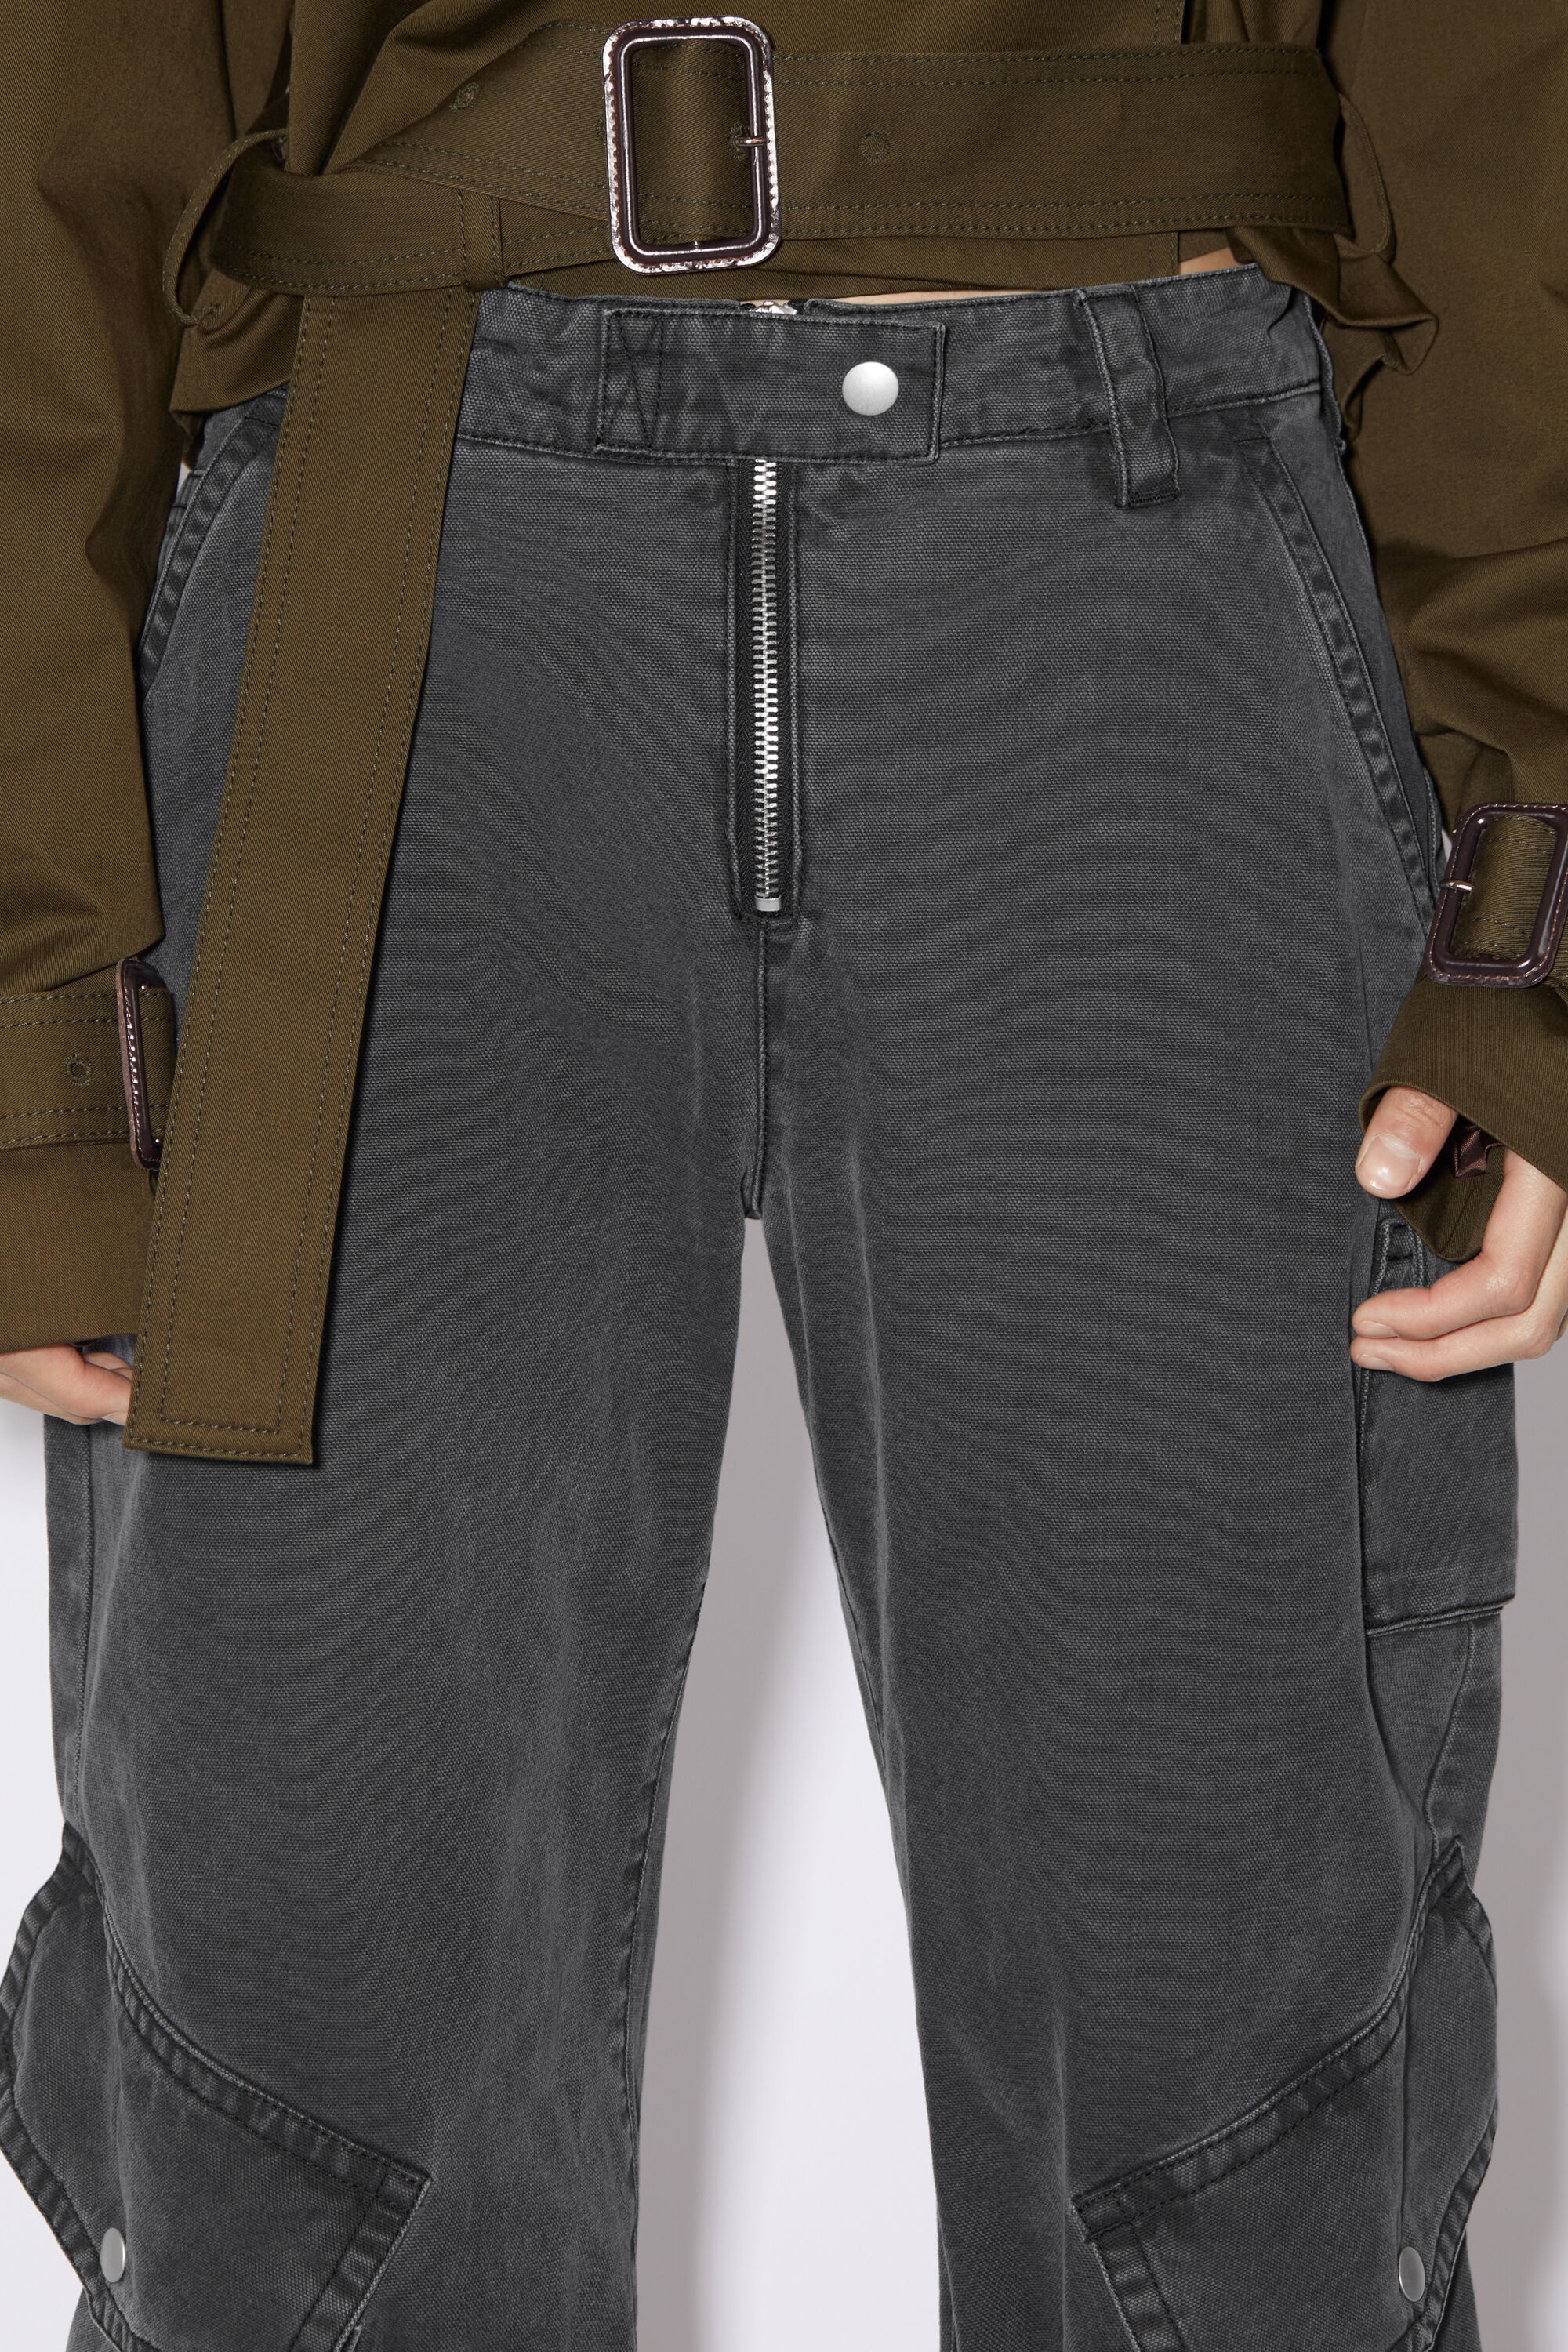 Acne Studios - Cargo trousers - Washed Black